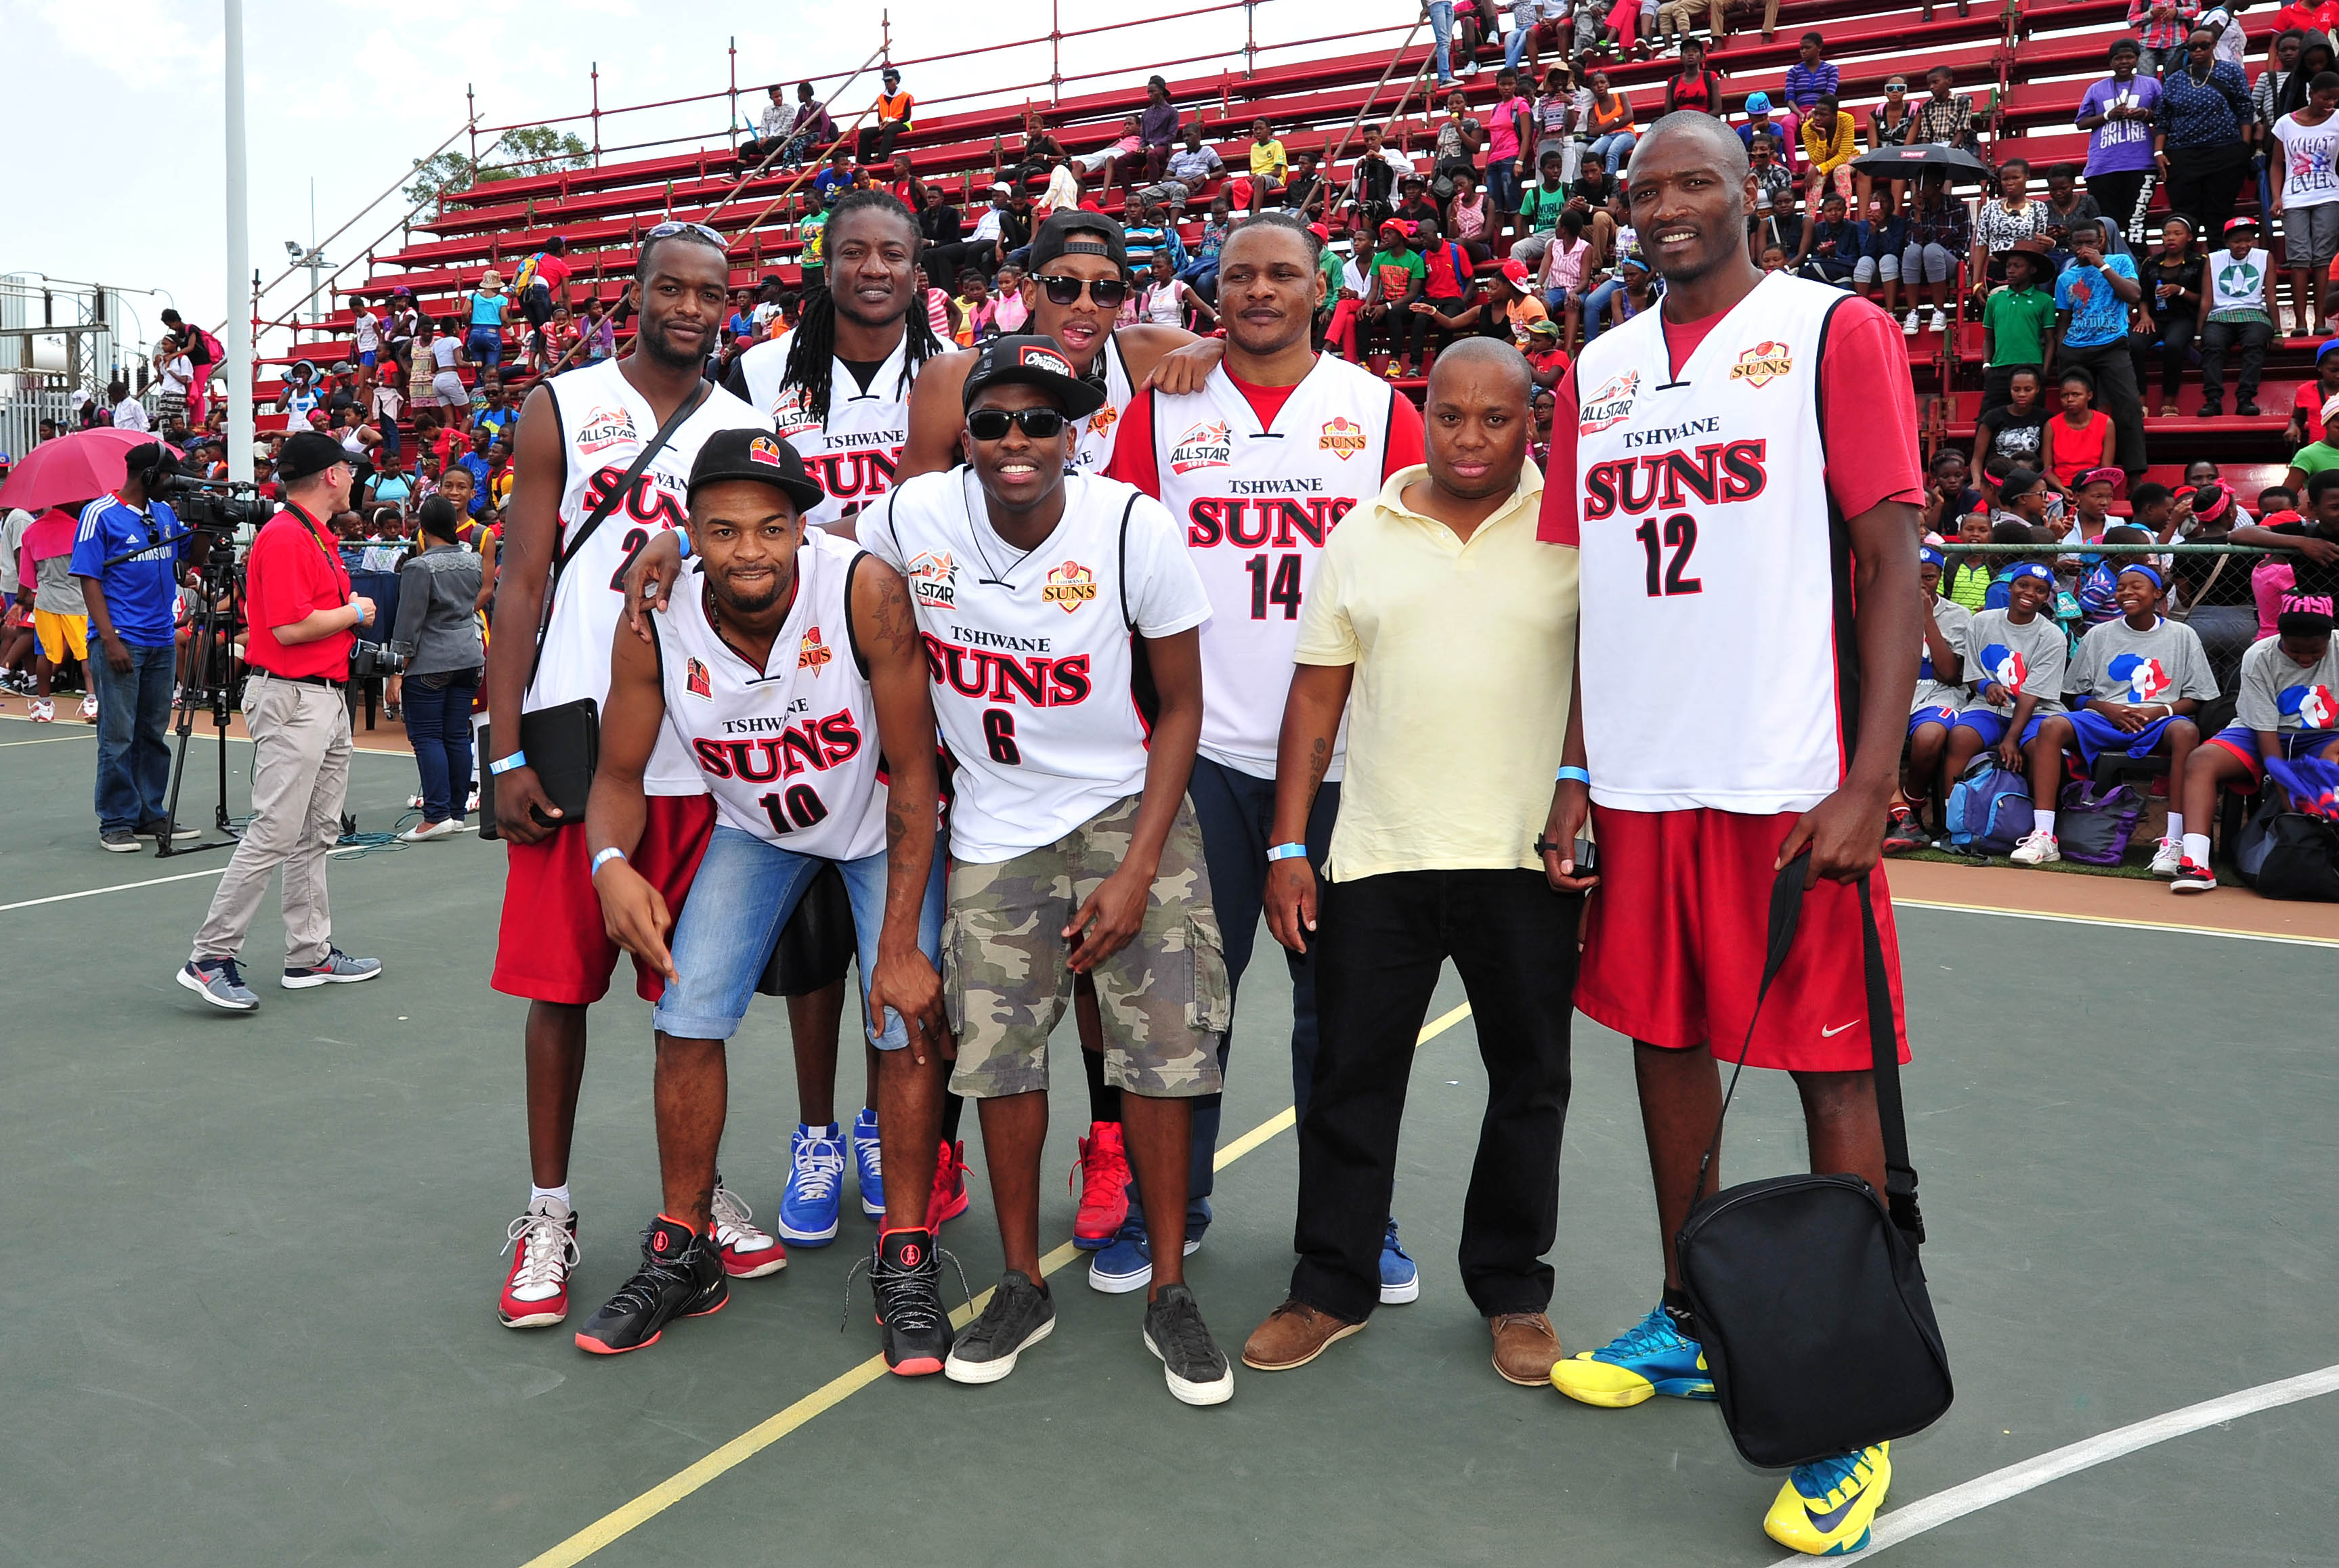 BNL (Basketball National League) 2-time Champions: Tshwane Suns came to support young talent at the RBS Basketball League Finals, 25 October 2014